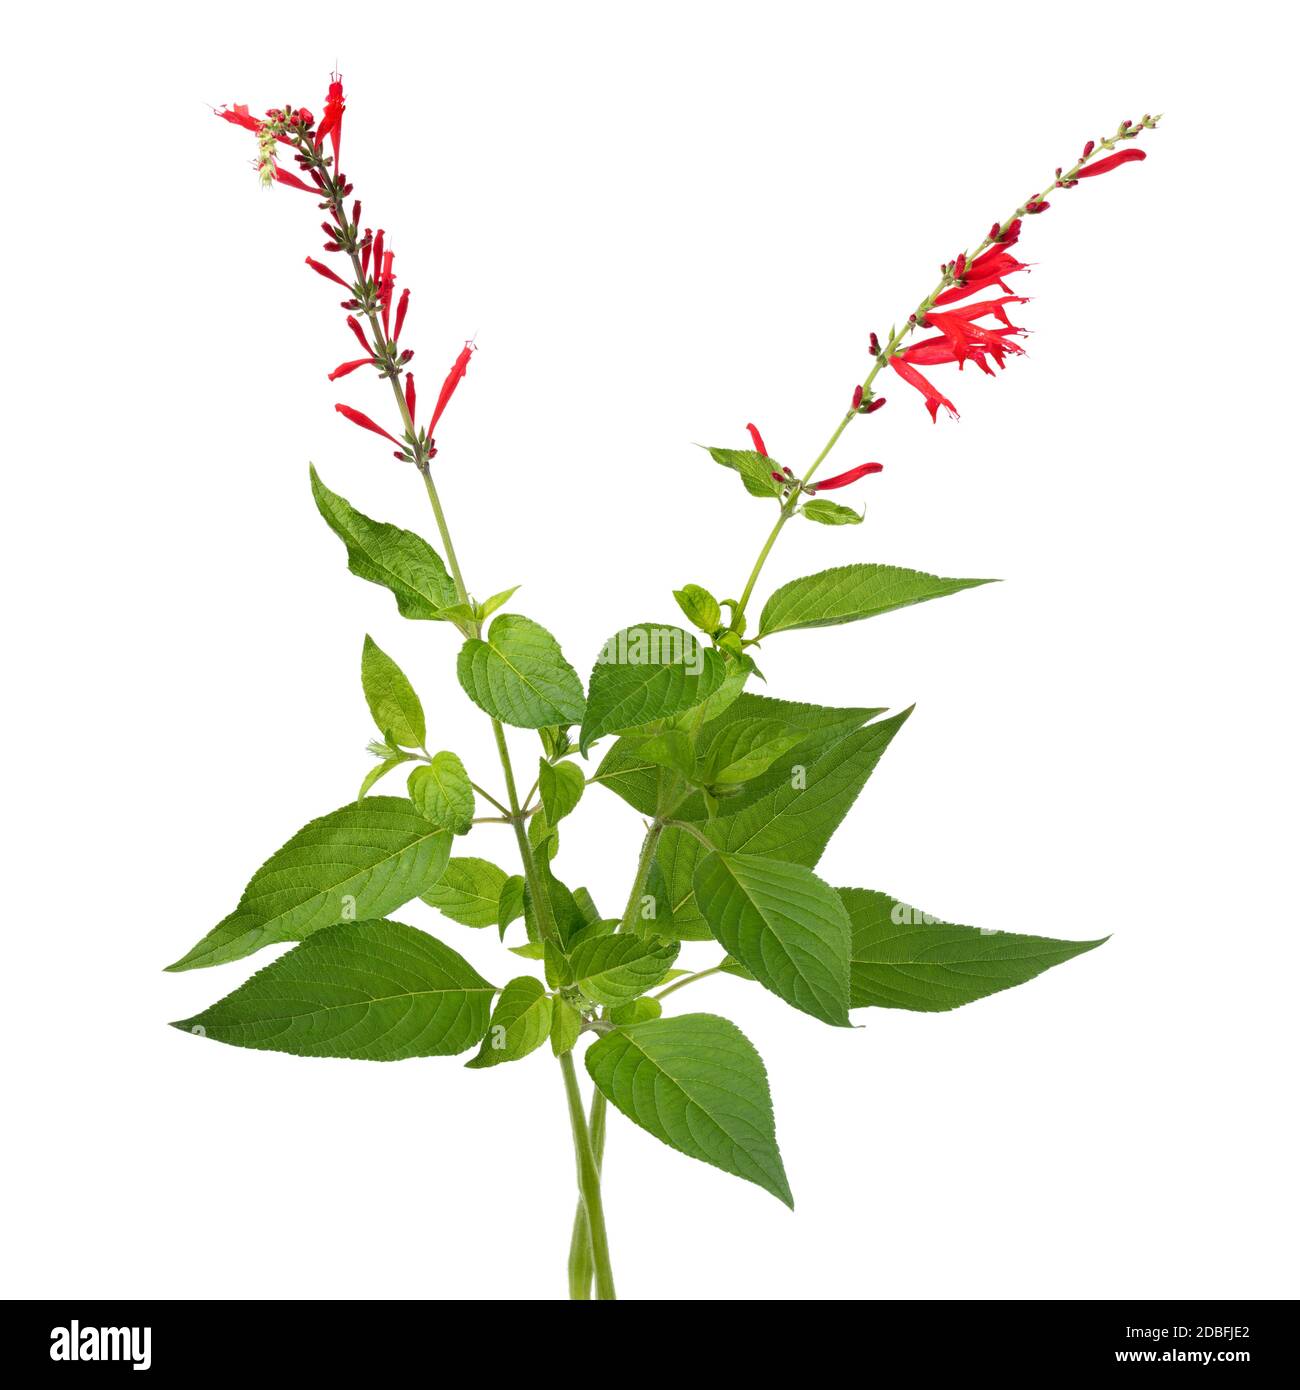 Pair of twigs of fresh red flowering Salvia elegans on white background Stock Photo